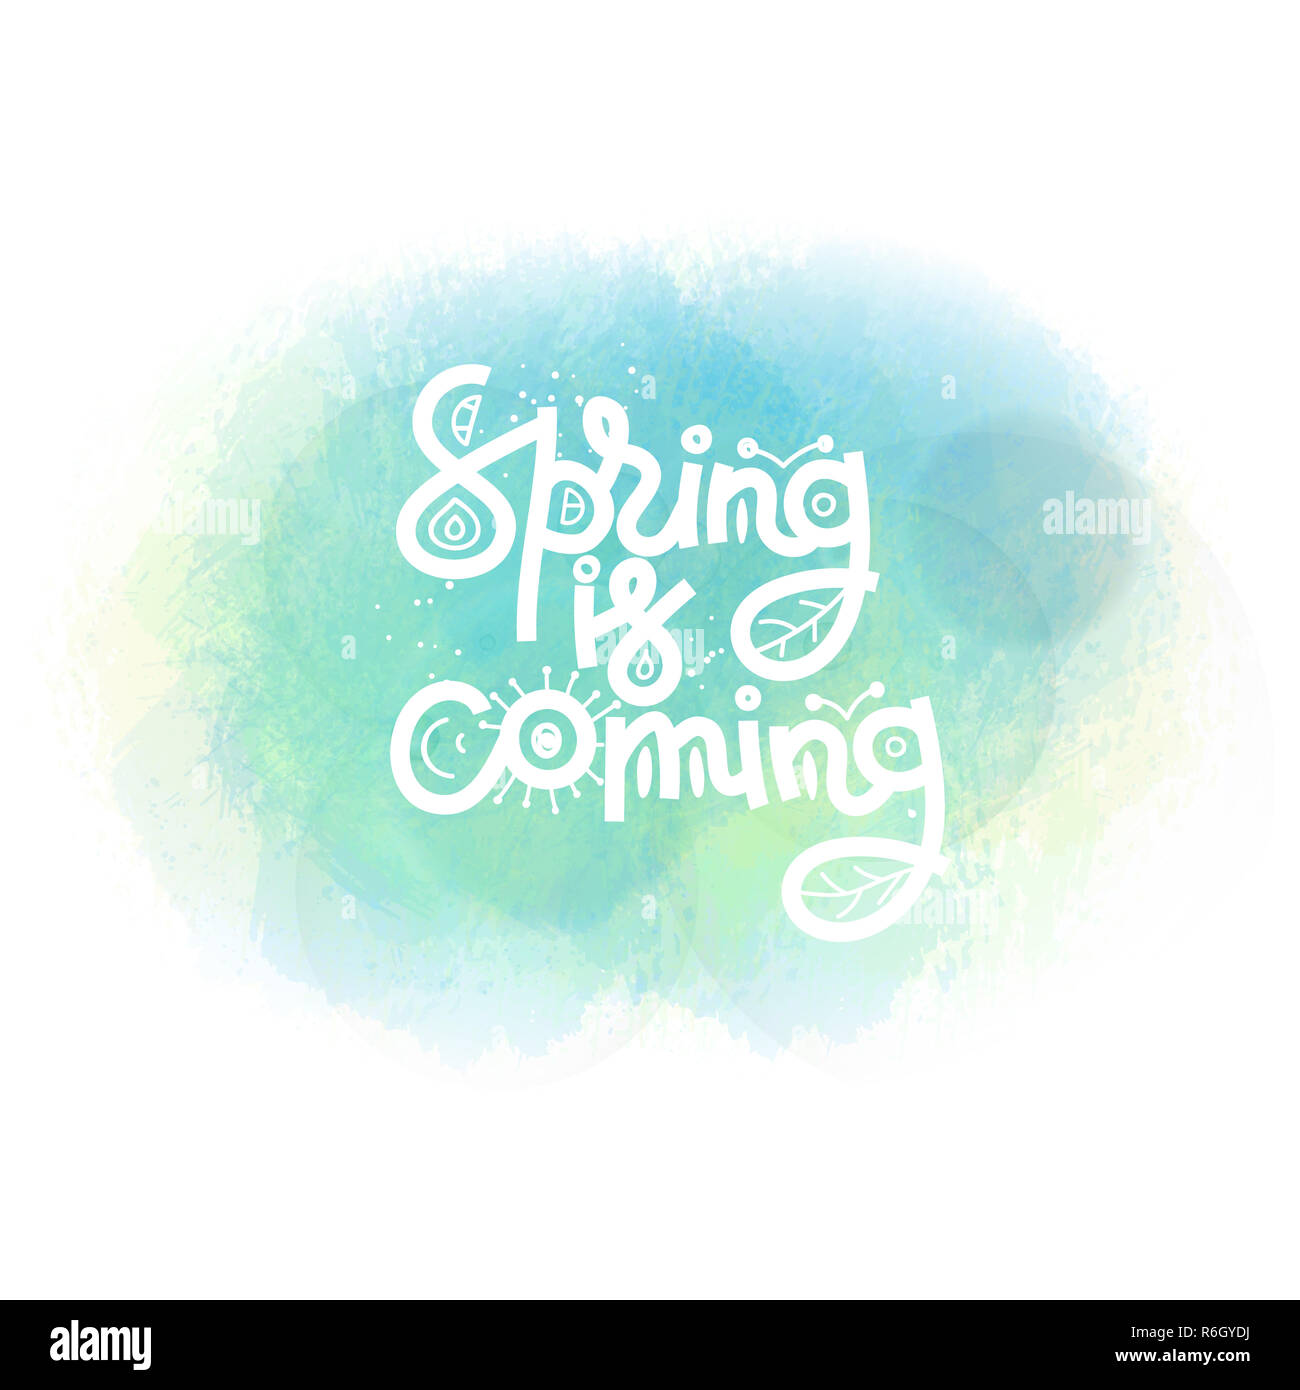 Spring is coming. Cute creative hand drawn lettering on watercolor stain. Freehand style. Doodle. Springtime Stock Photo